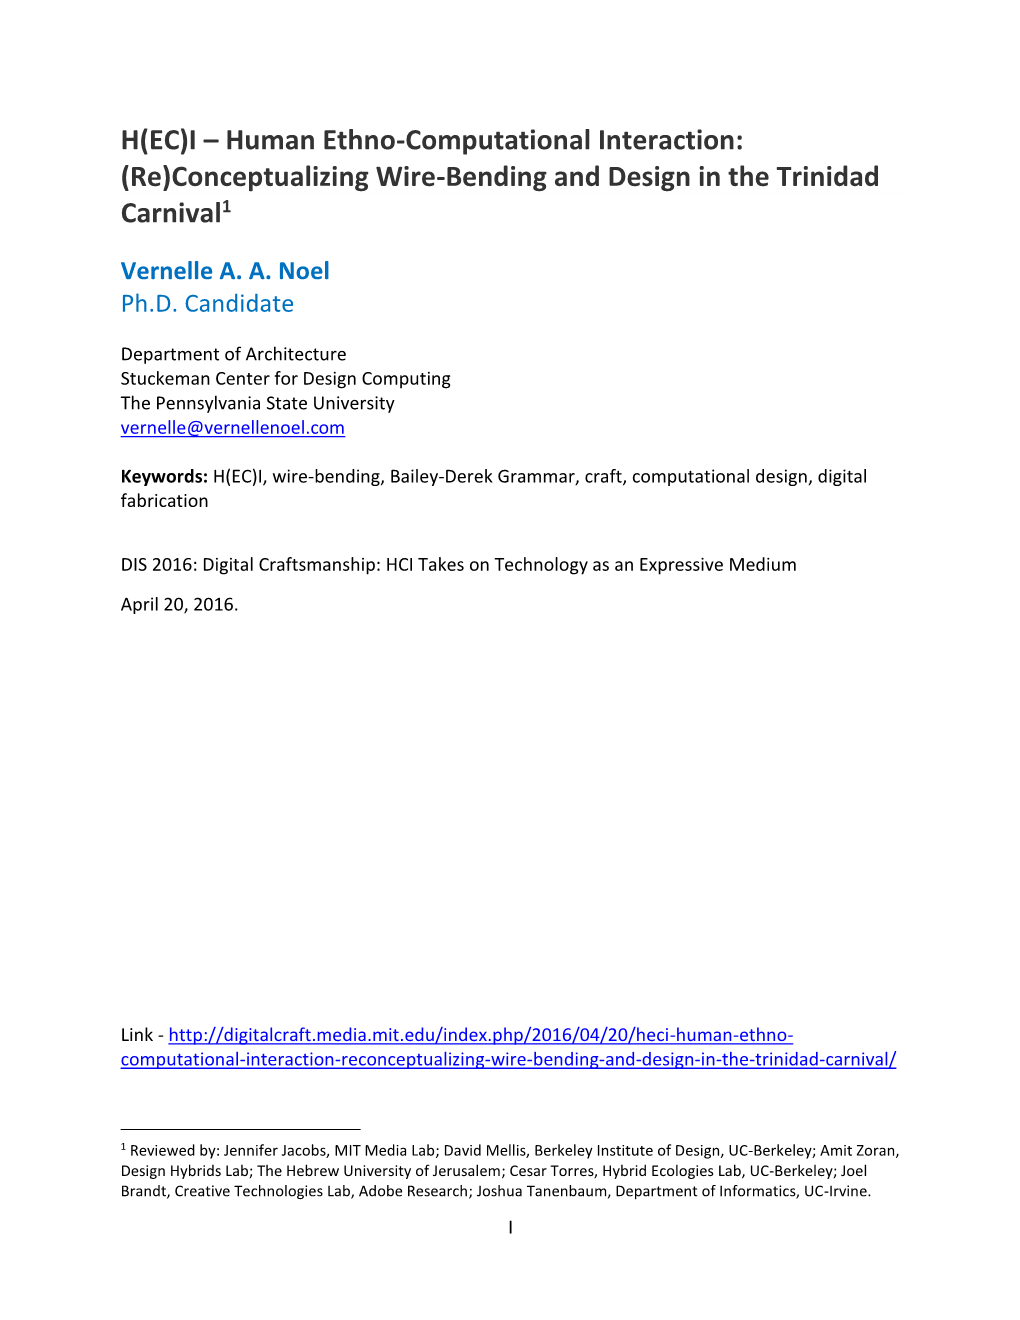 H(EC)I – Human Ethno-Computational Interaction: (Re)Conceptualizing Wire-Bending and Design in the Trinidad Carnival1